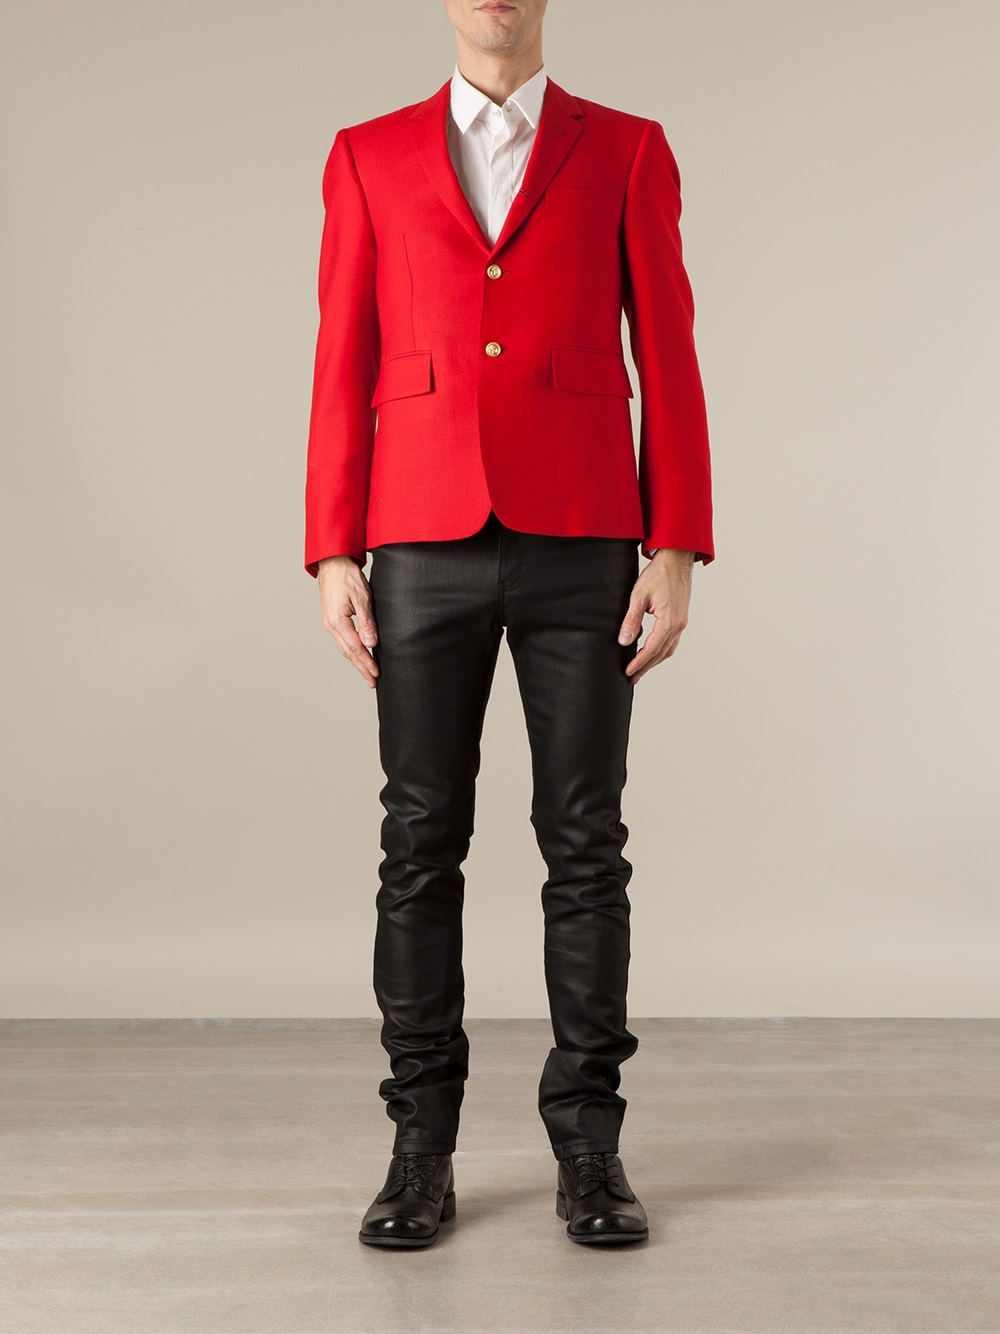 Thom Browne Ribbon Laced Blazer in Red for Men - Lyst